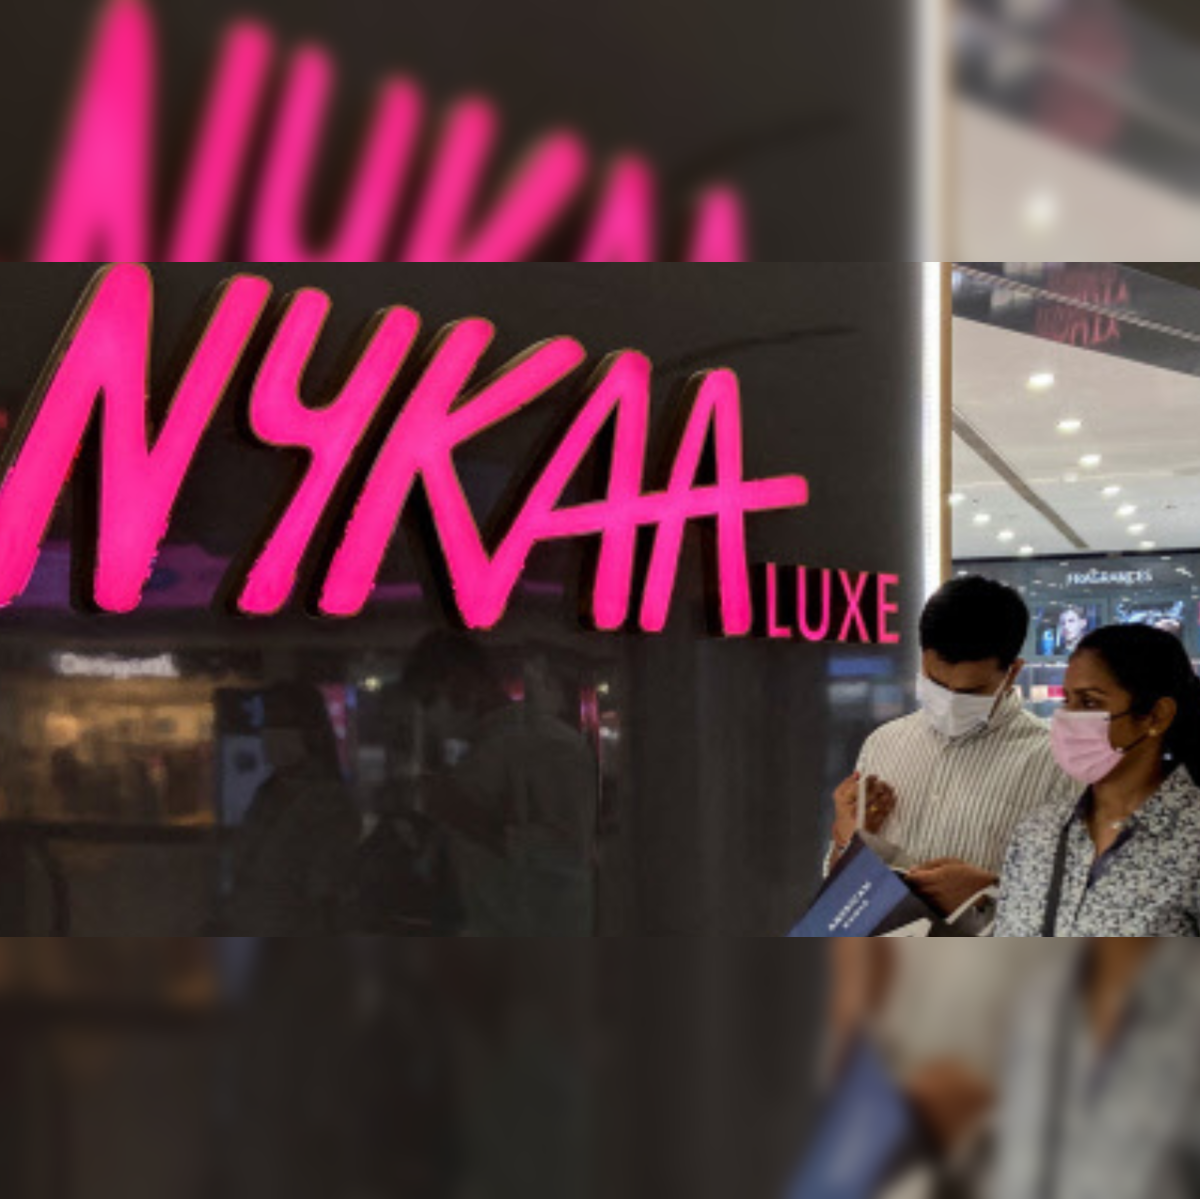 Is it the right time to invest in Nykaa stock? - Quora